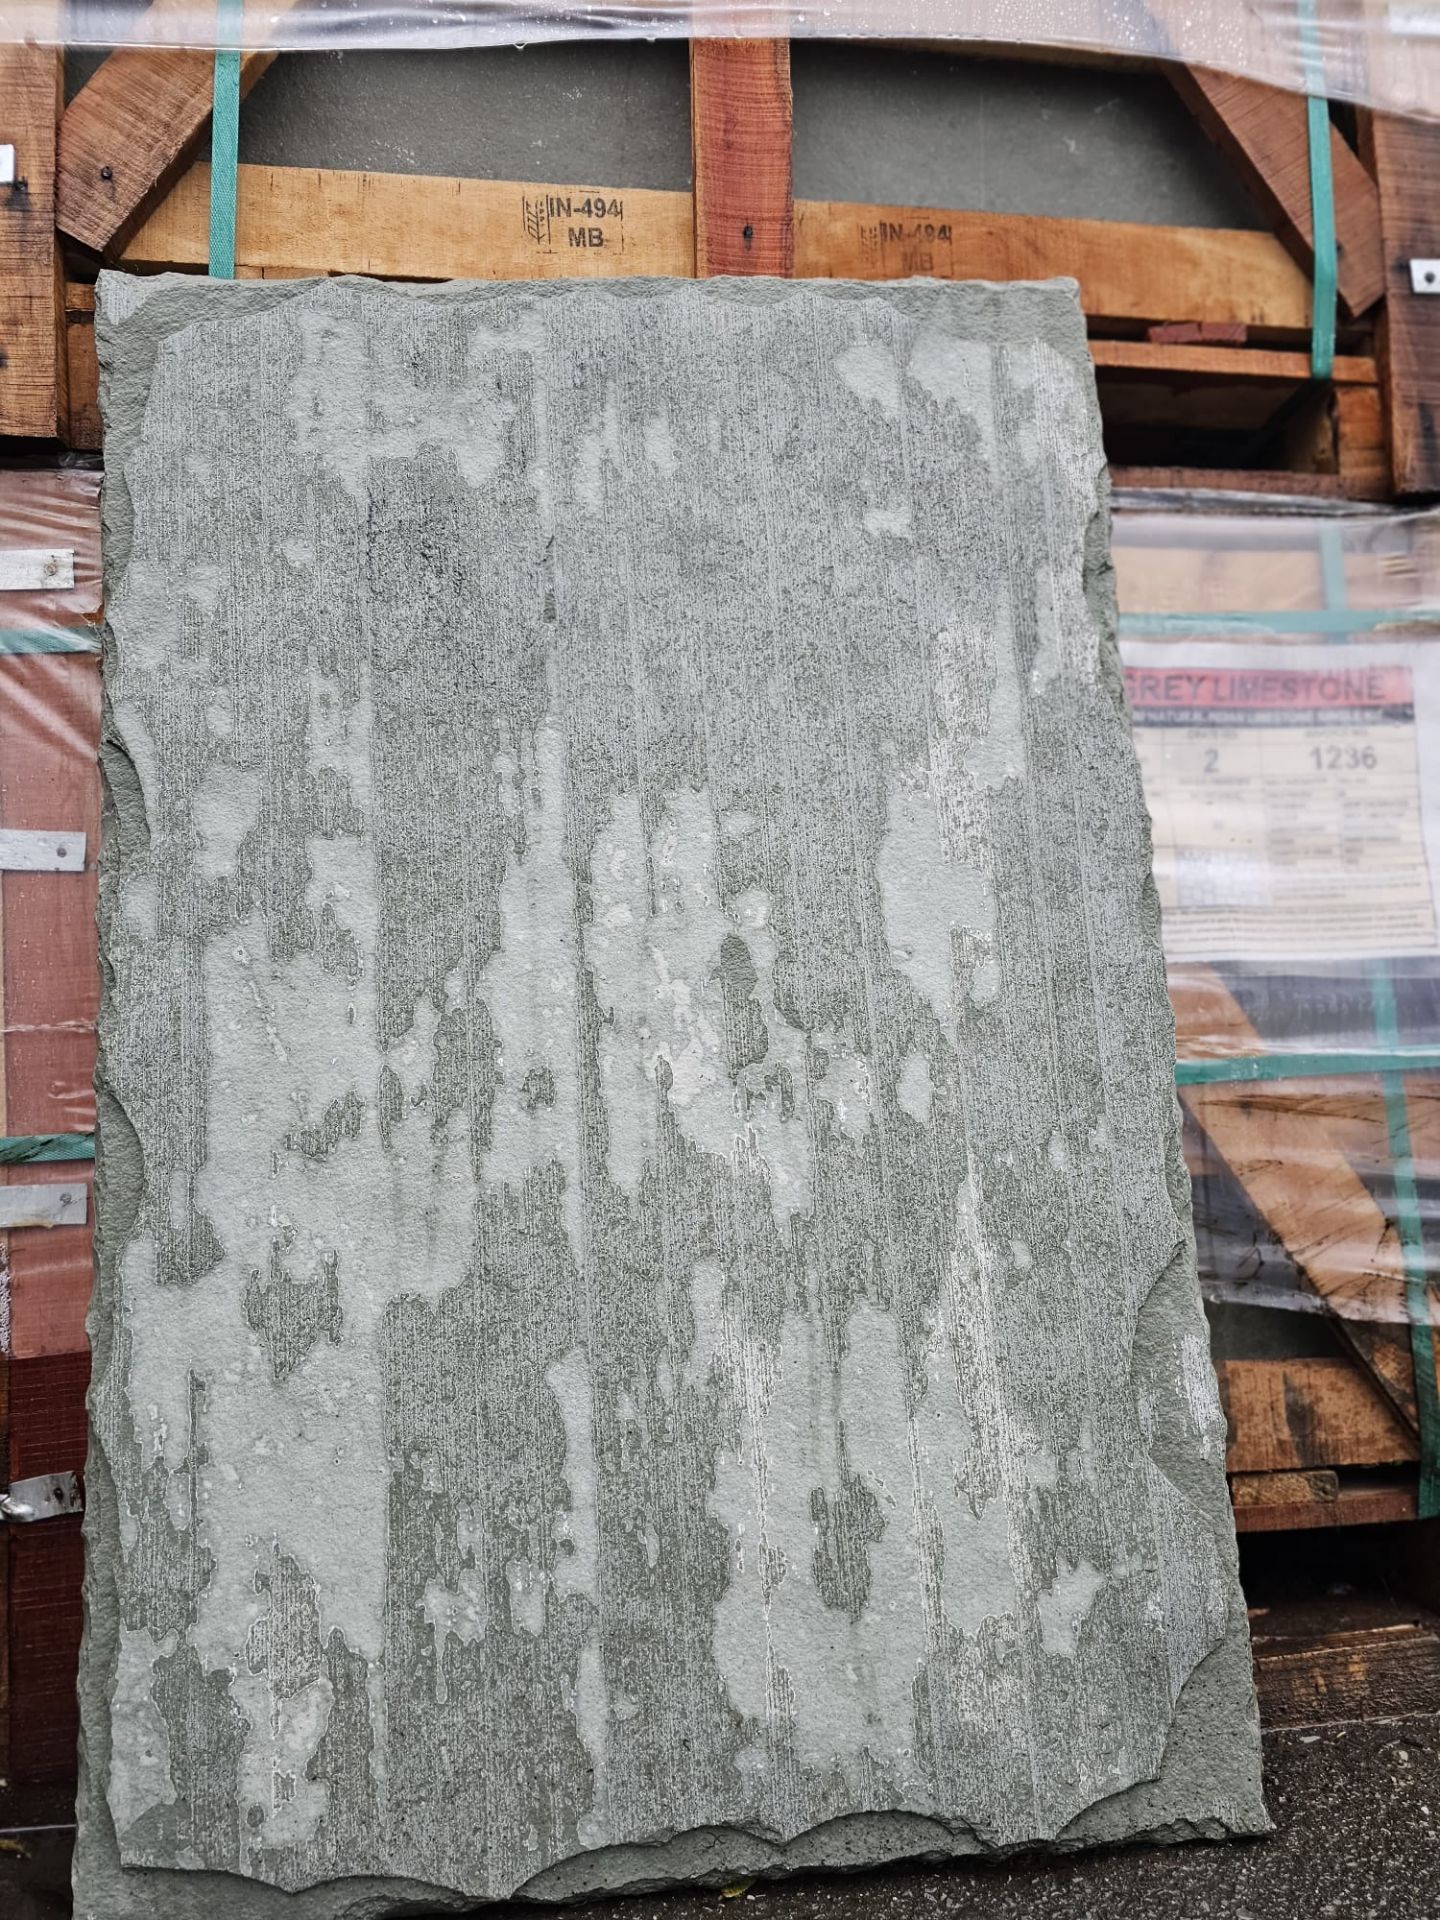 1 PALLET OF 18.9sqm LIMESTONE GREY TILES - 22MM CALIBRATED - SLAB SIZE 60X90CM - 35 SLABS - Image 2 of 3